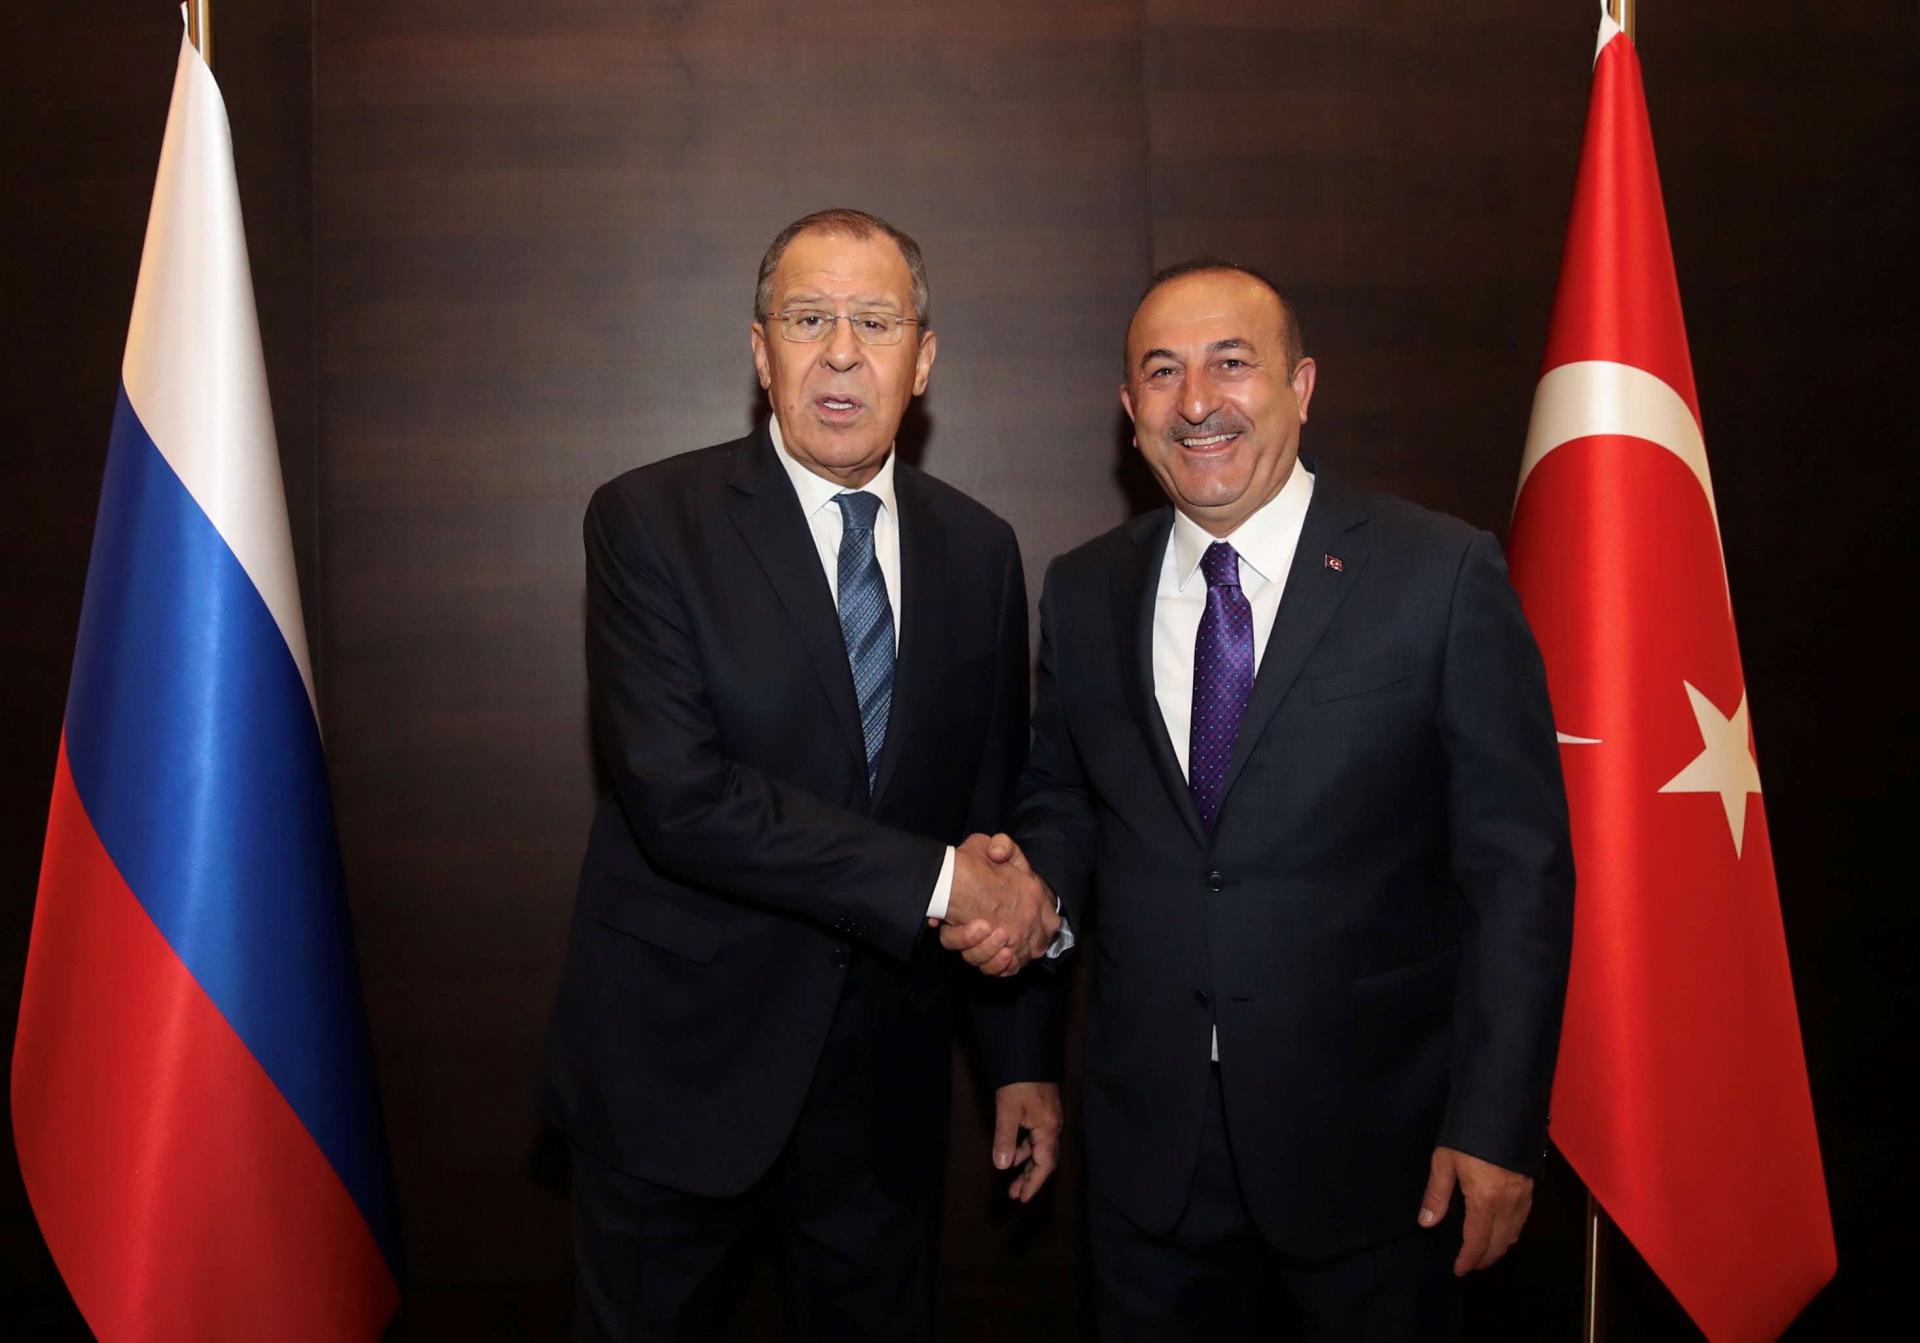 Turkish Foreign Minister Mevlut Cavusoglu meets with his Russian counterpart Sergei Lavrov in Antalya, Turkey March 29, 2019.